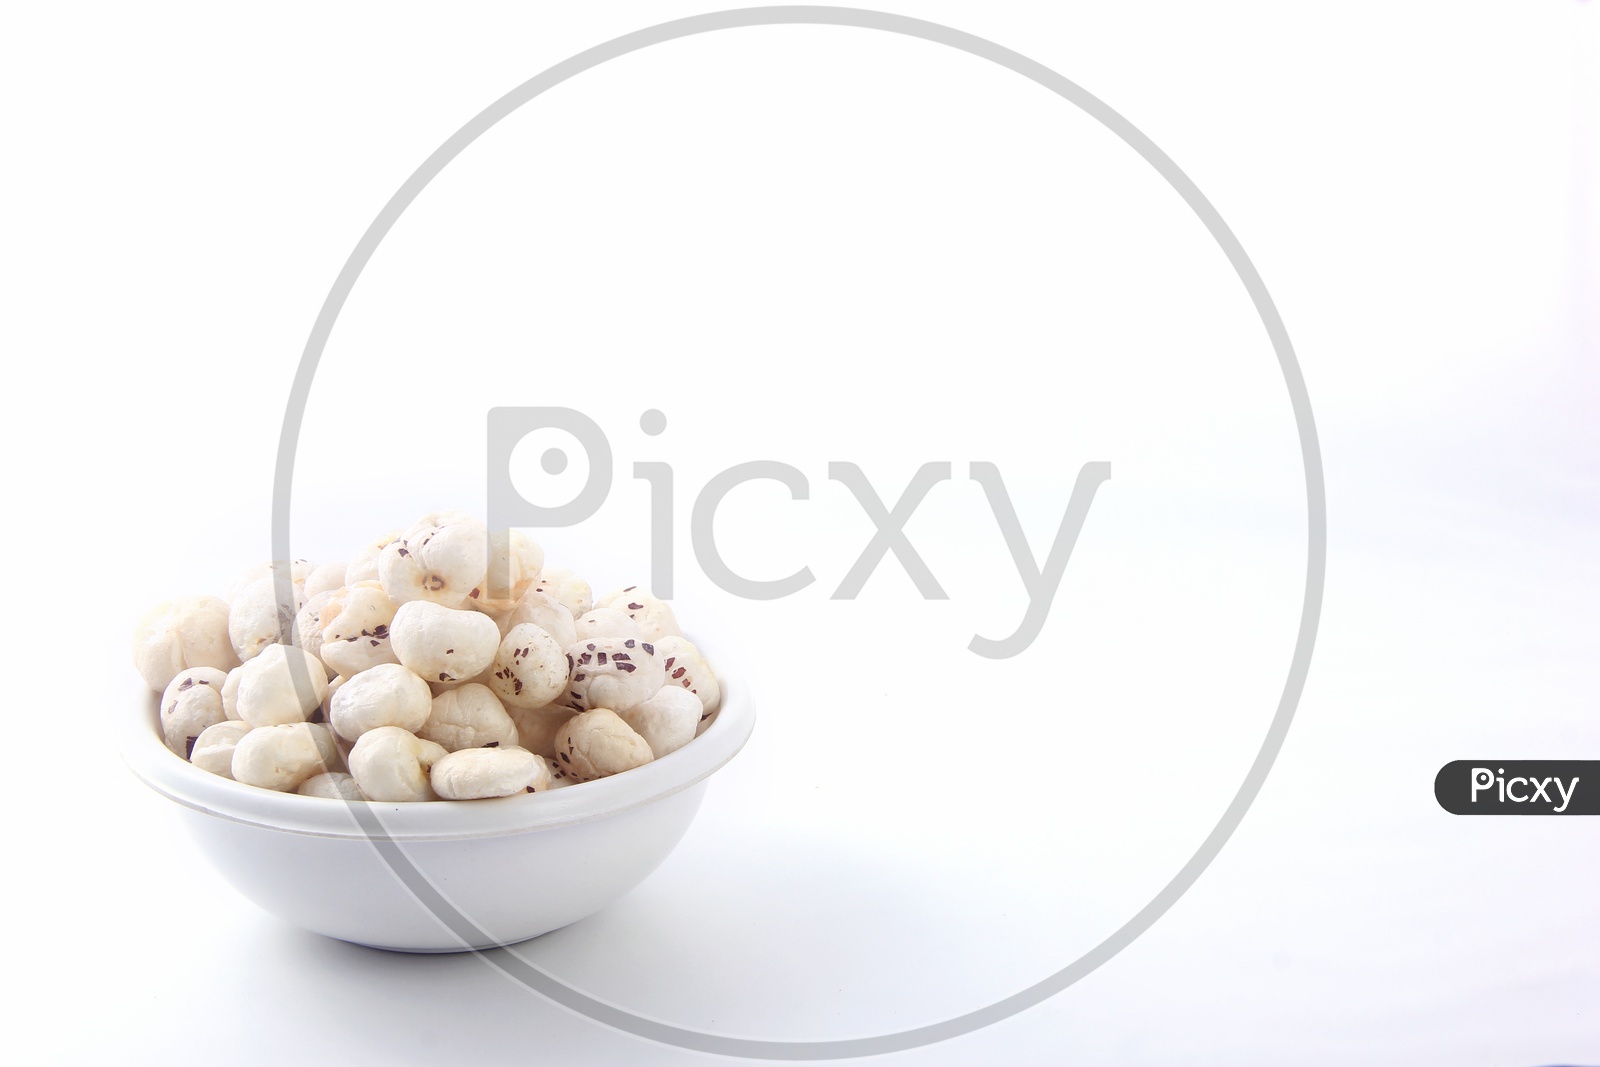 Fox Nuts / Gorgon Nuts /Makhana / Lotus Seed Pops in a Bowl on an Isolated White Background